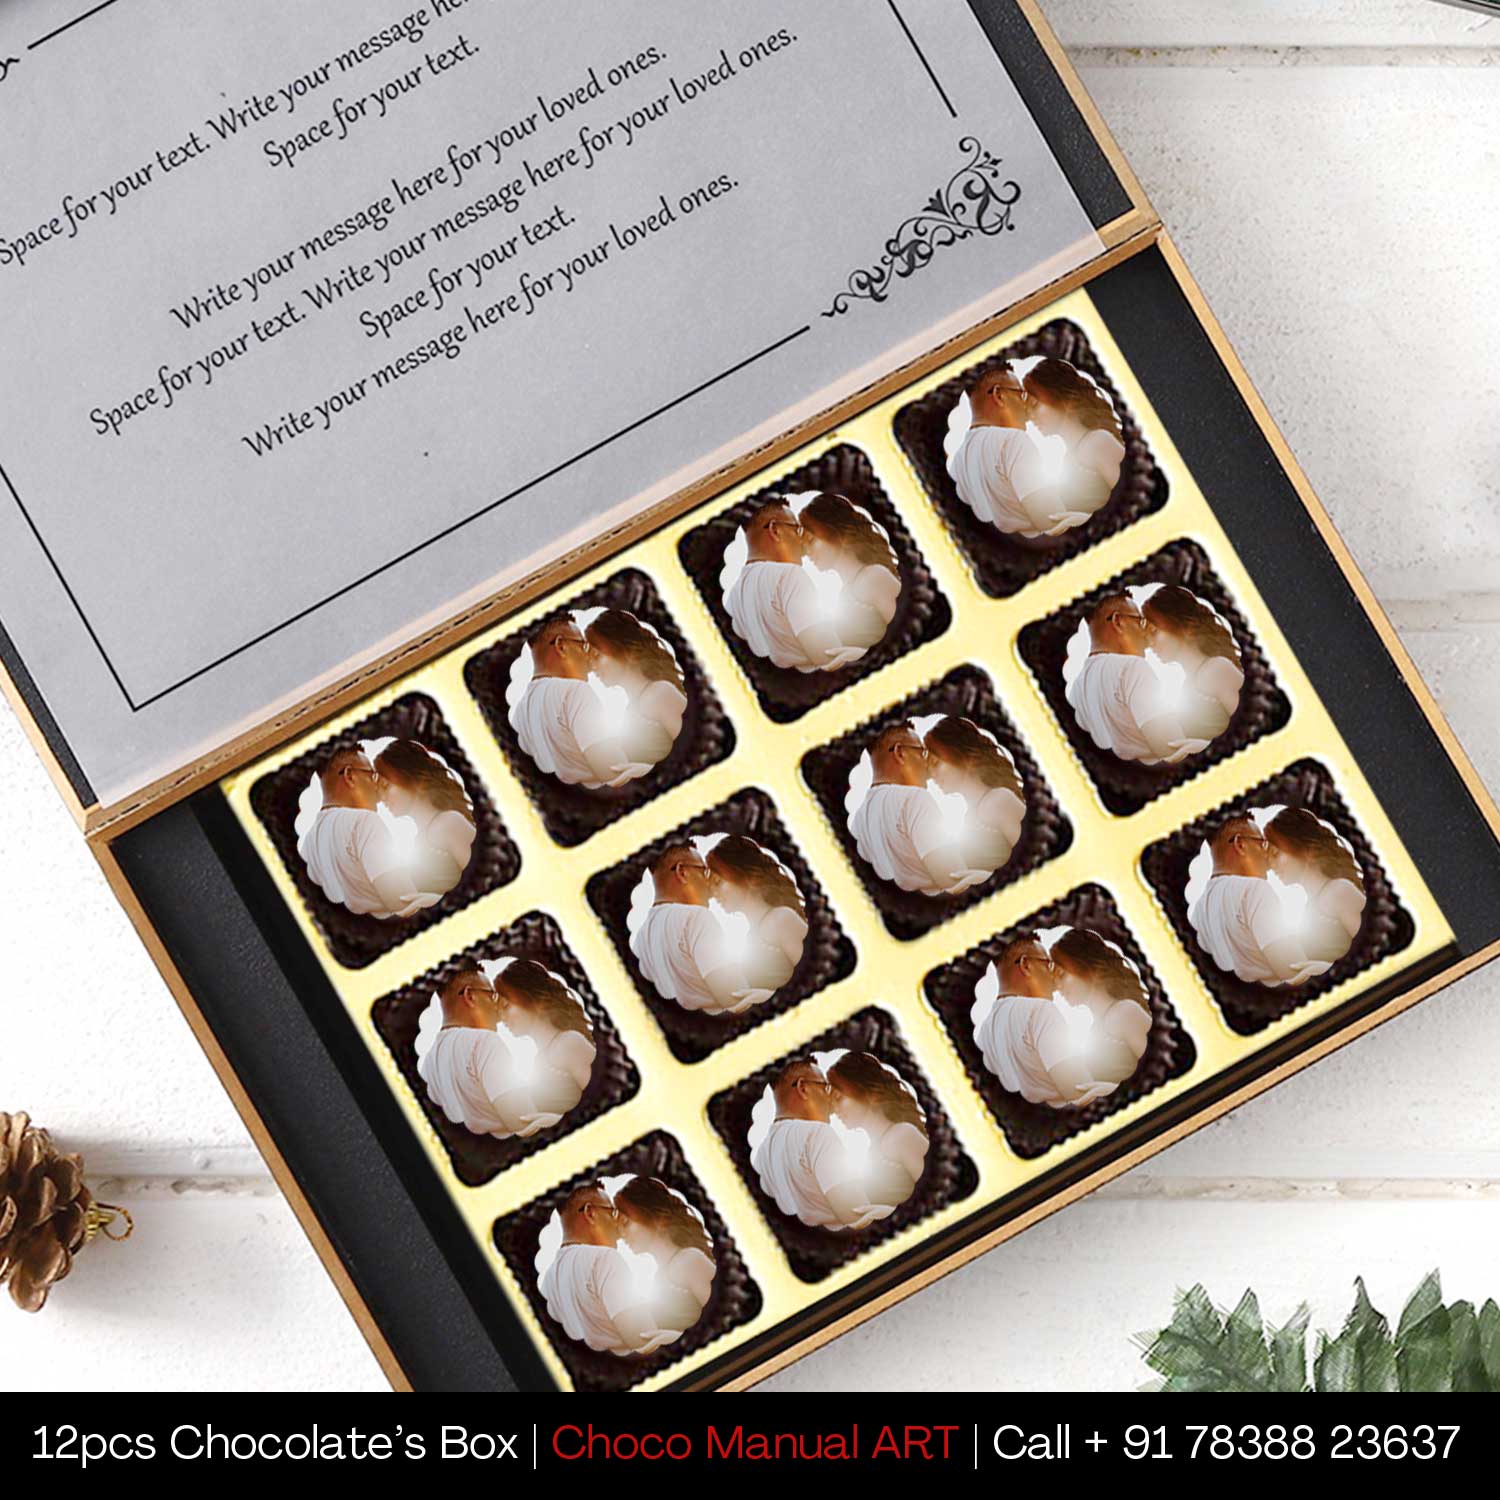 Buy Personalised Chocolate with Photo Name Messages Print on them